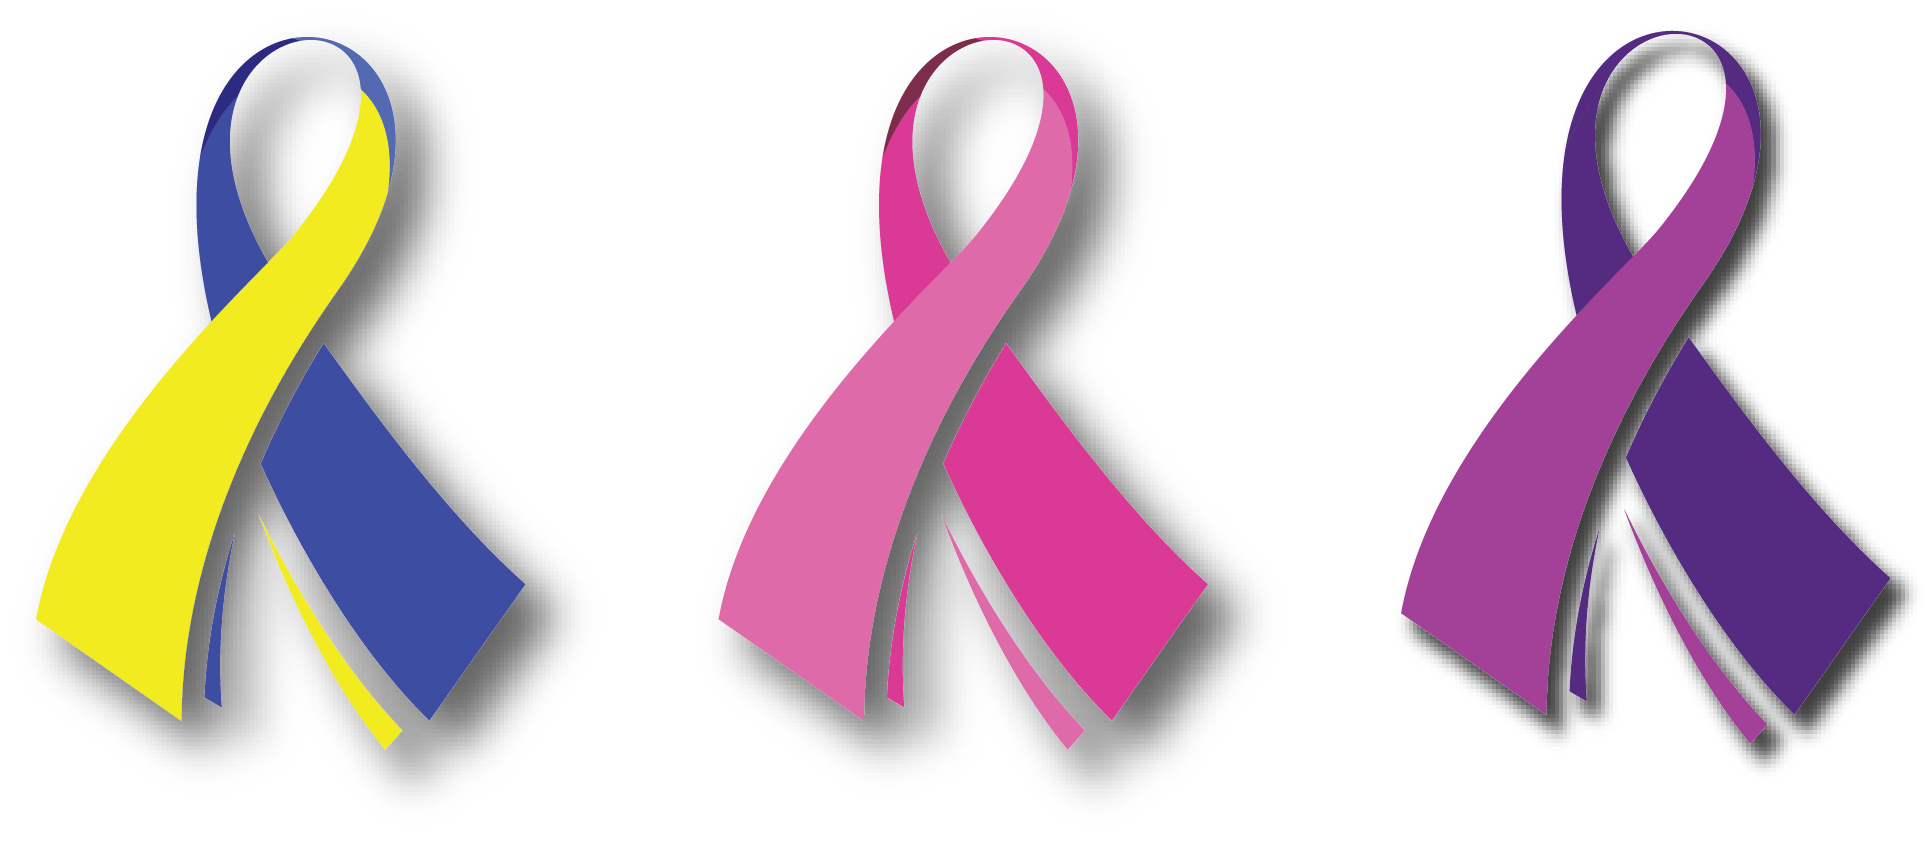 27 Breast Cancer Ribbon Png Free Cliparts That You Can Download To You